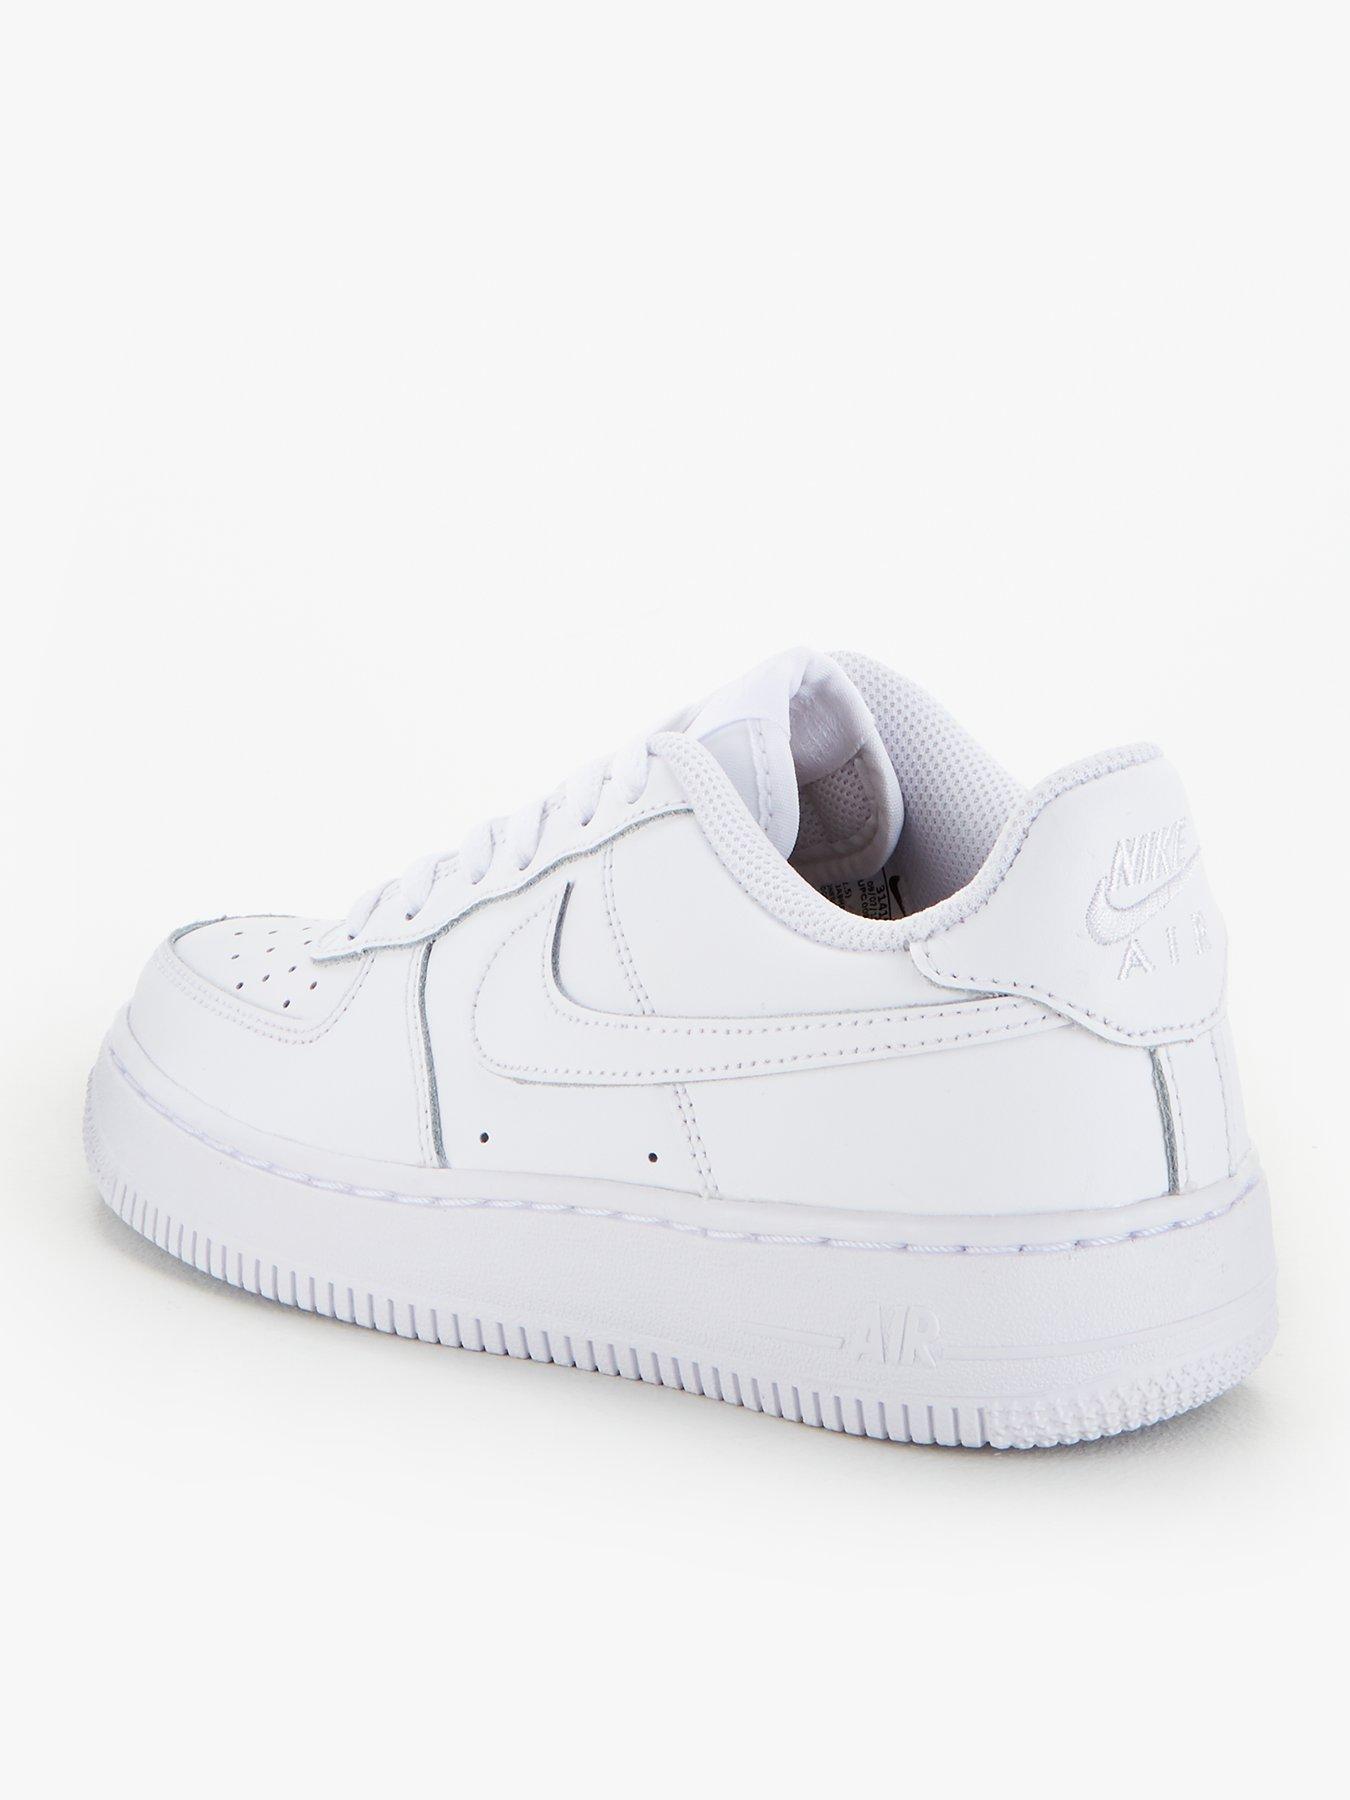 white air force 1 junior size 4